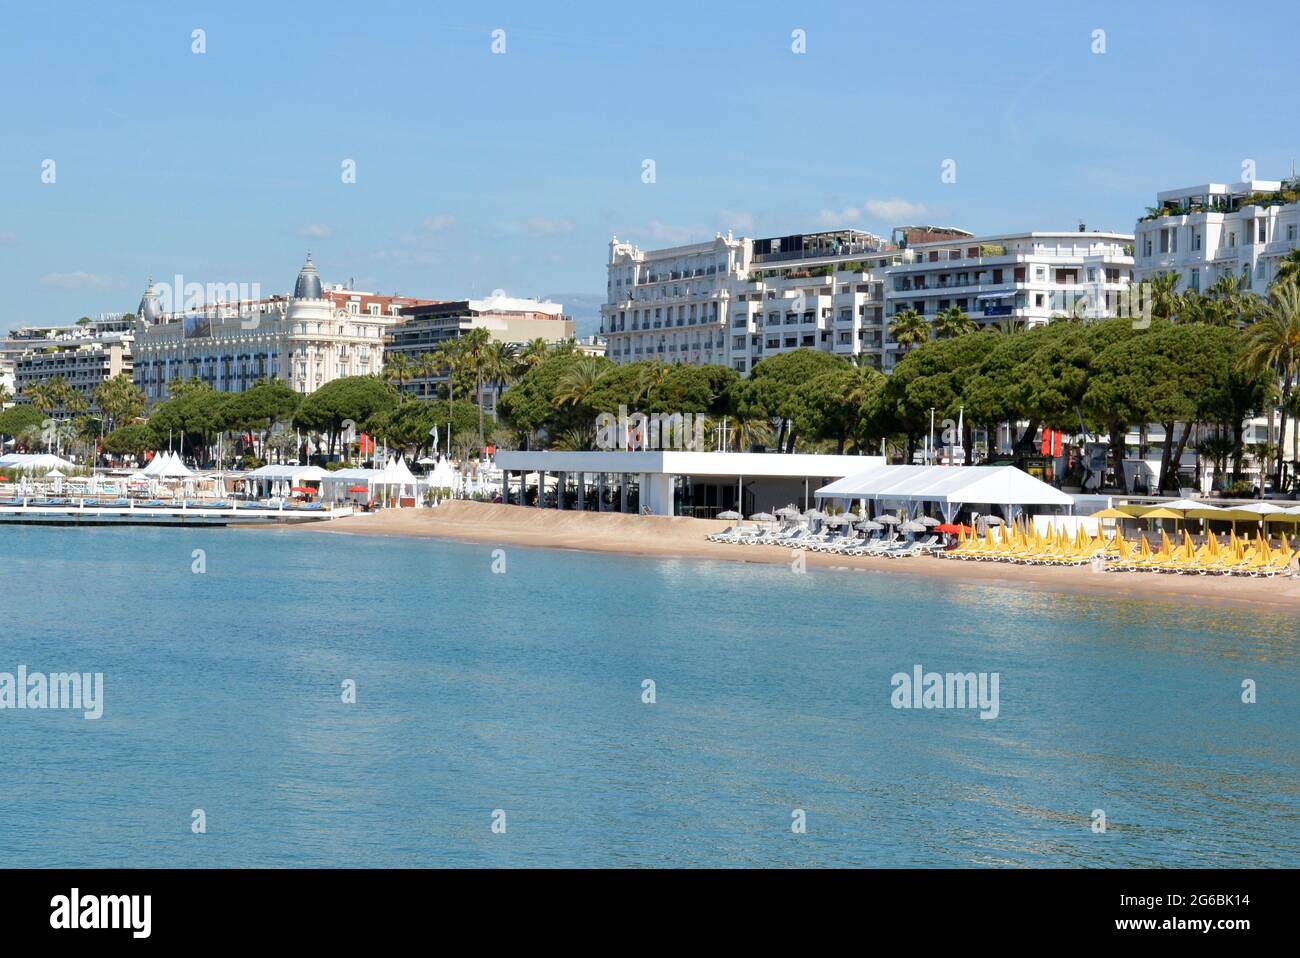 France, Cannes, Boulevard Croisette,,luxury hotels, sand beaches with multi-colored umbrellas and sun loungers. Stock Photo